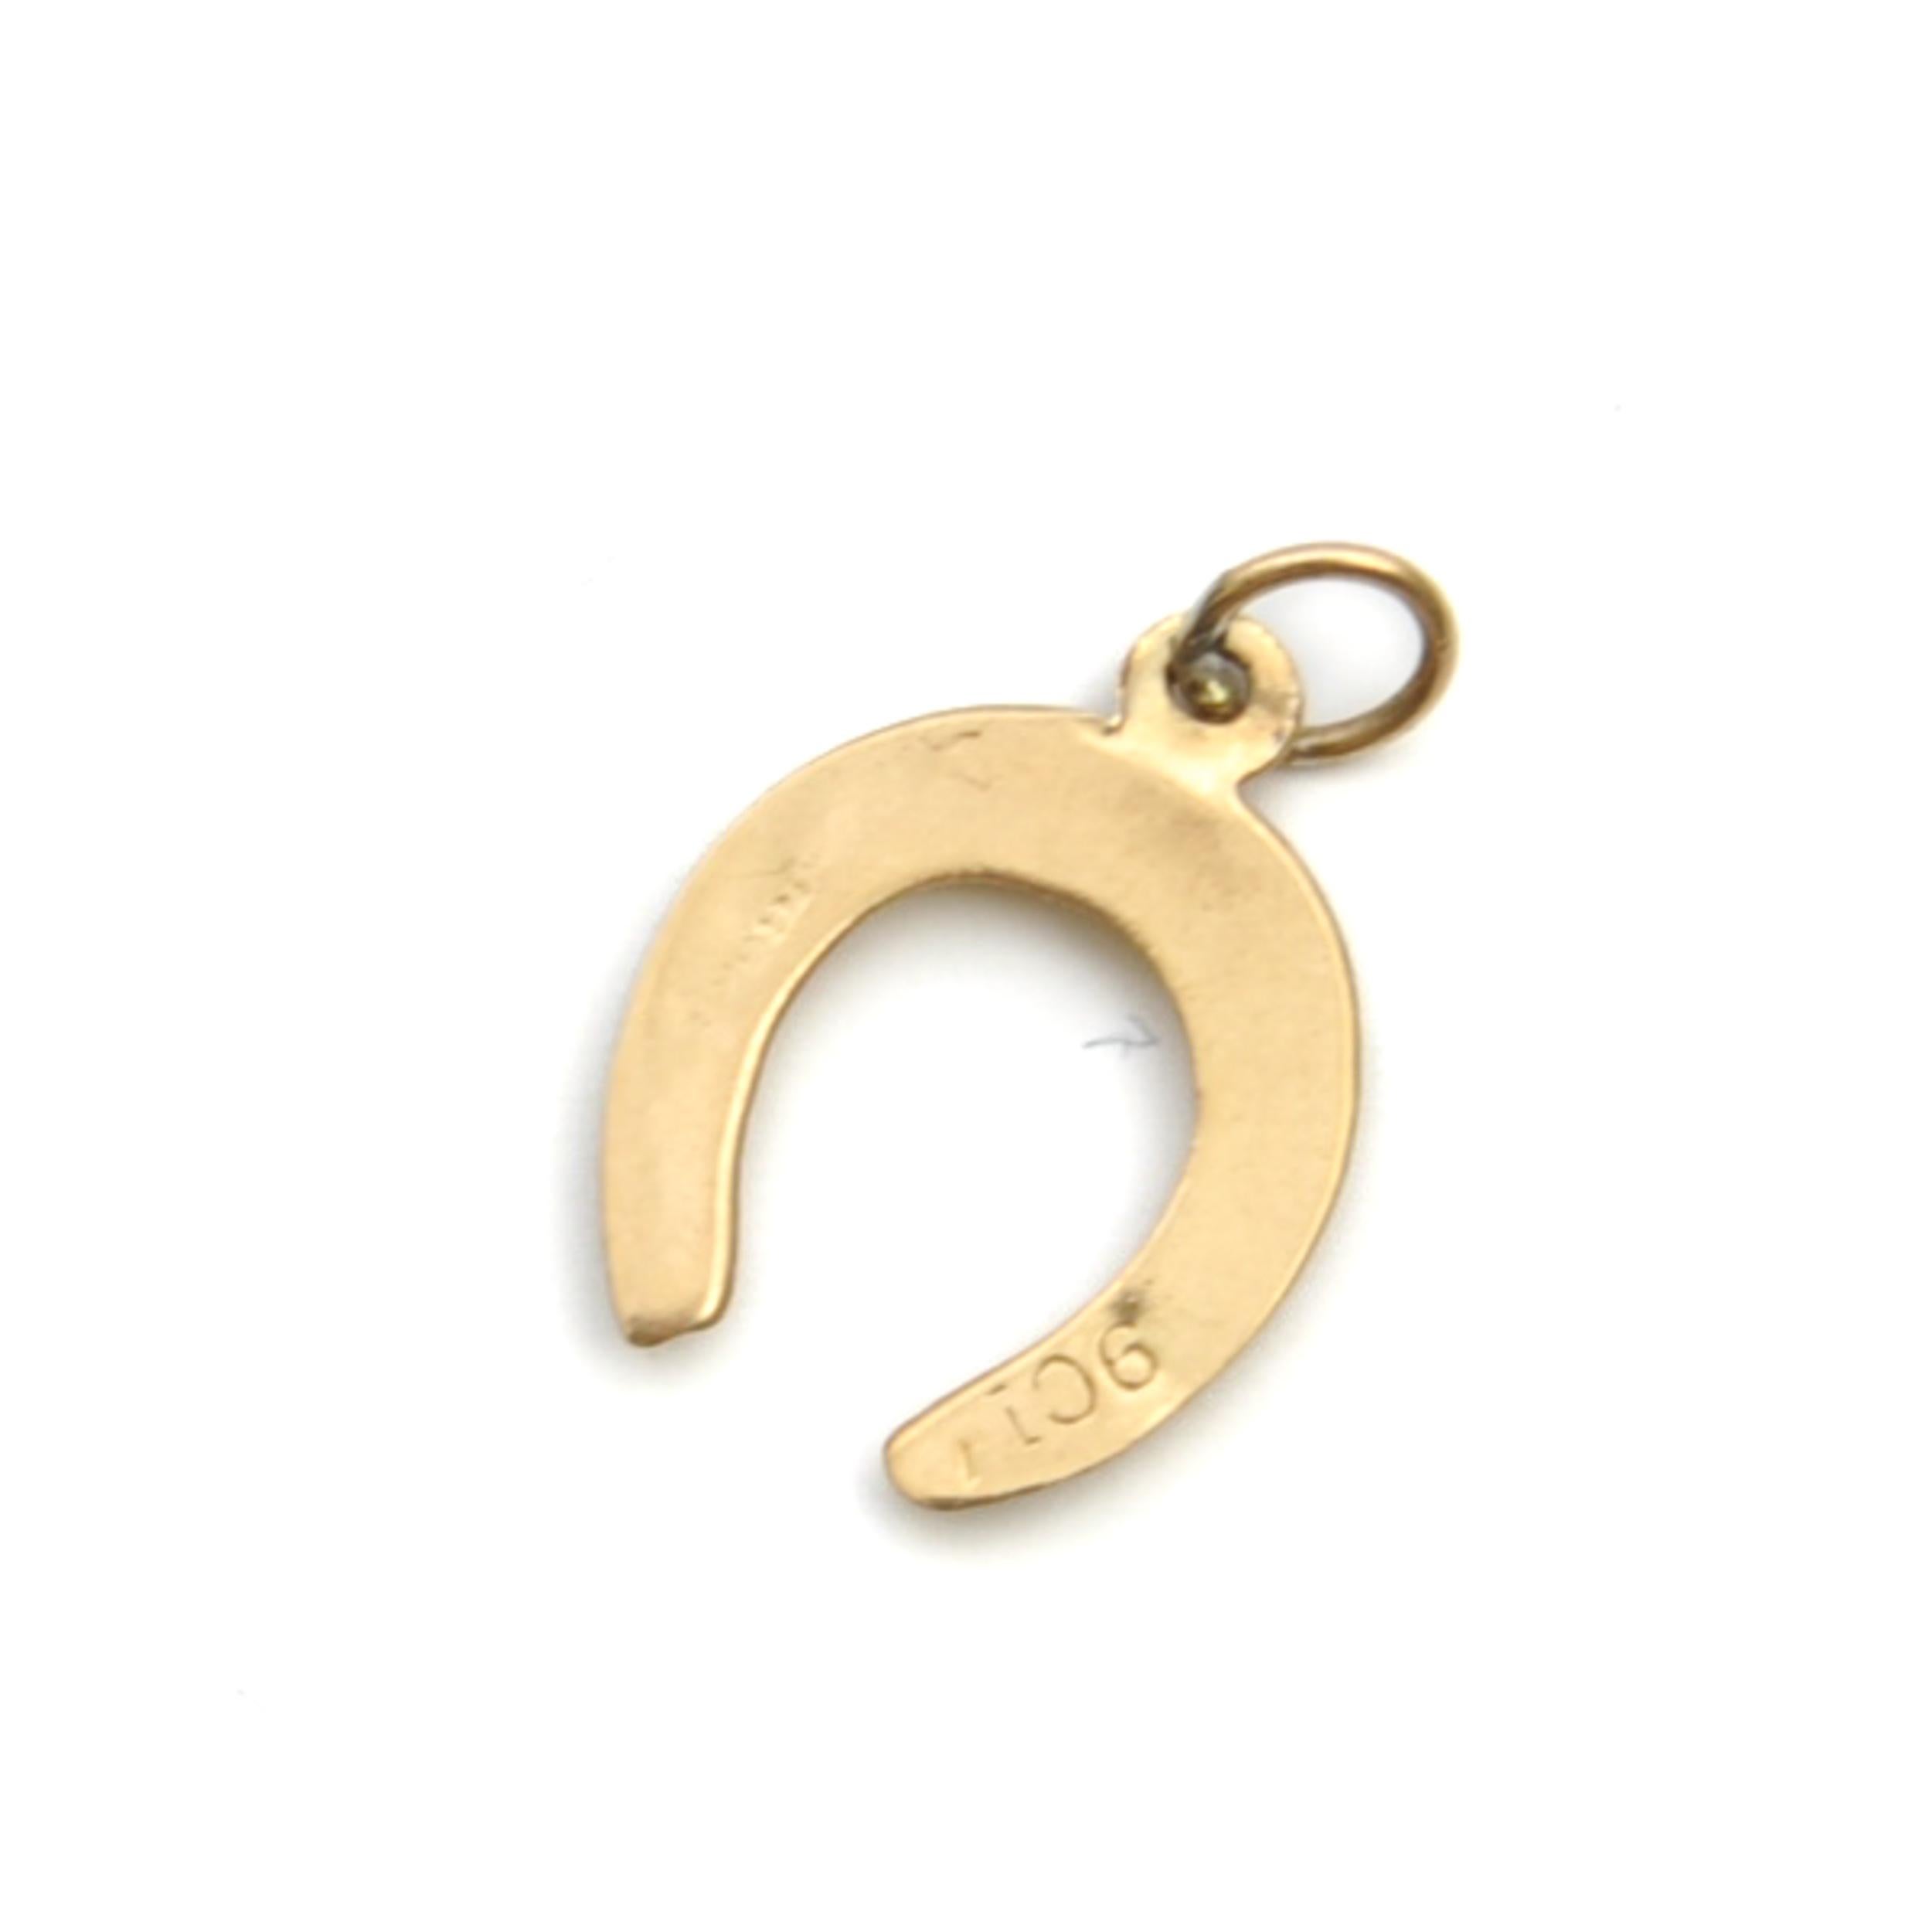 Vintage 9K Gold Lucky Horseshoe Charm Pendant In Good Condition For Sale In Rotterdam, NL